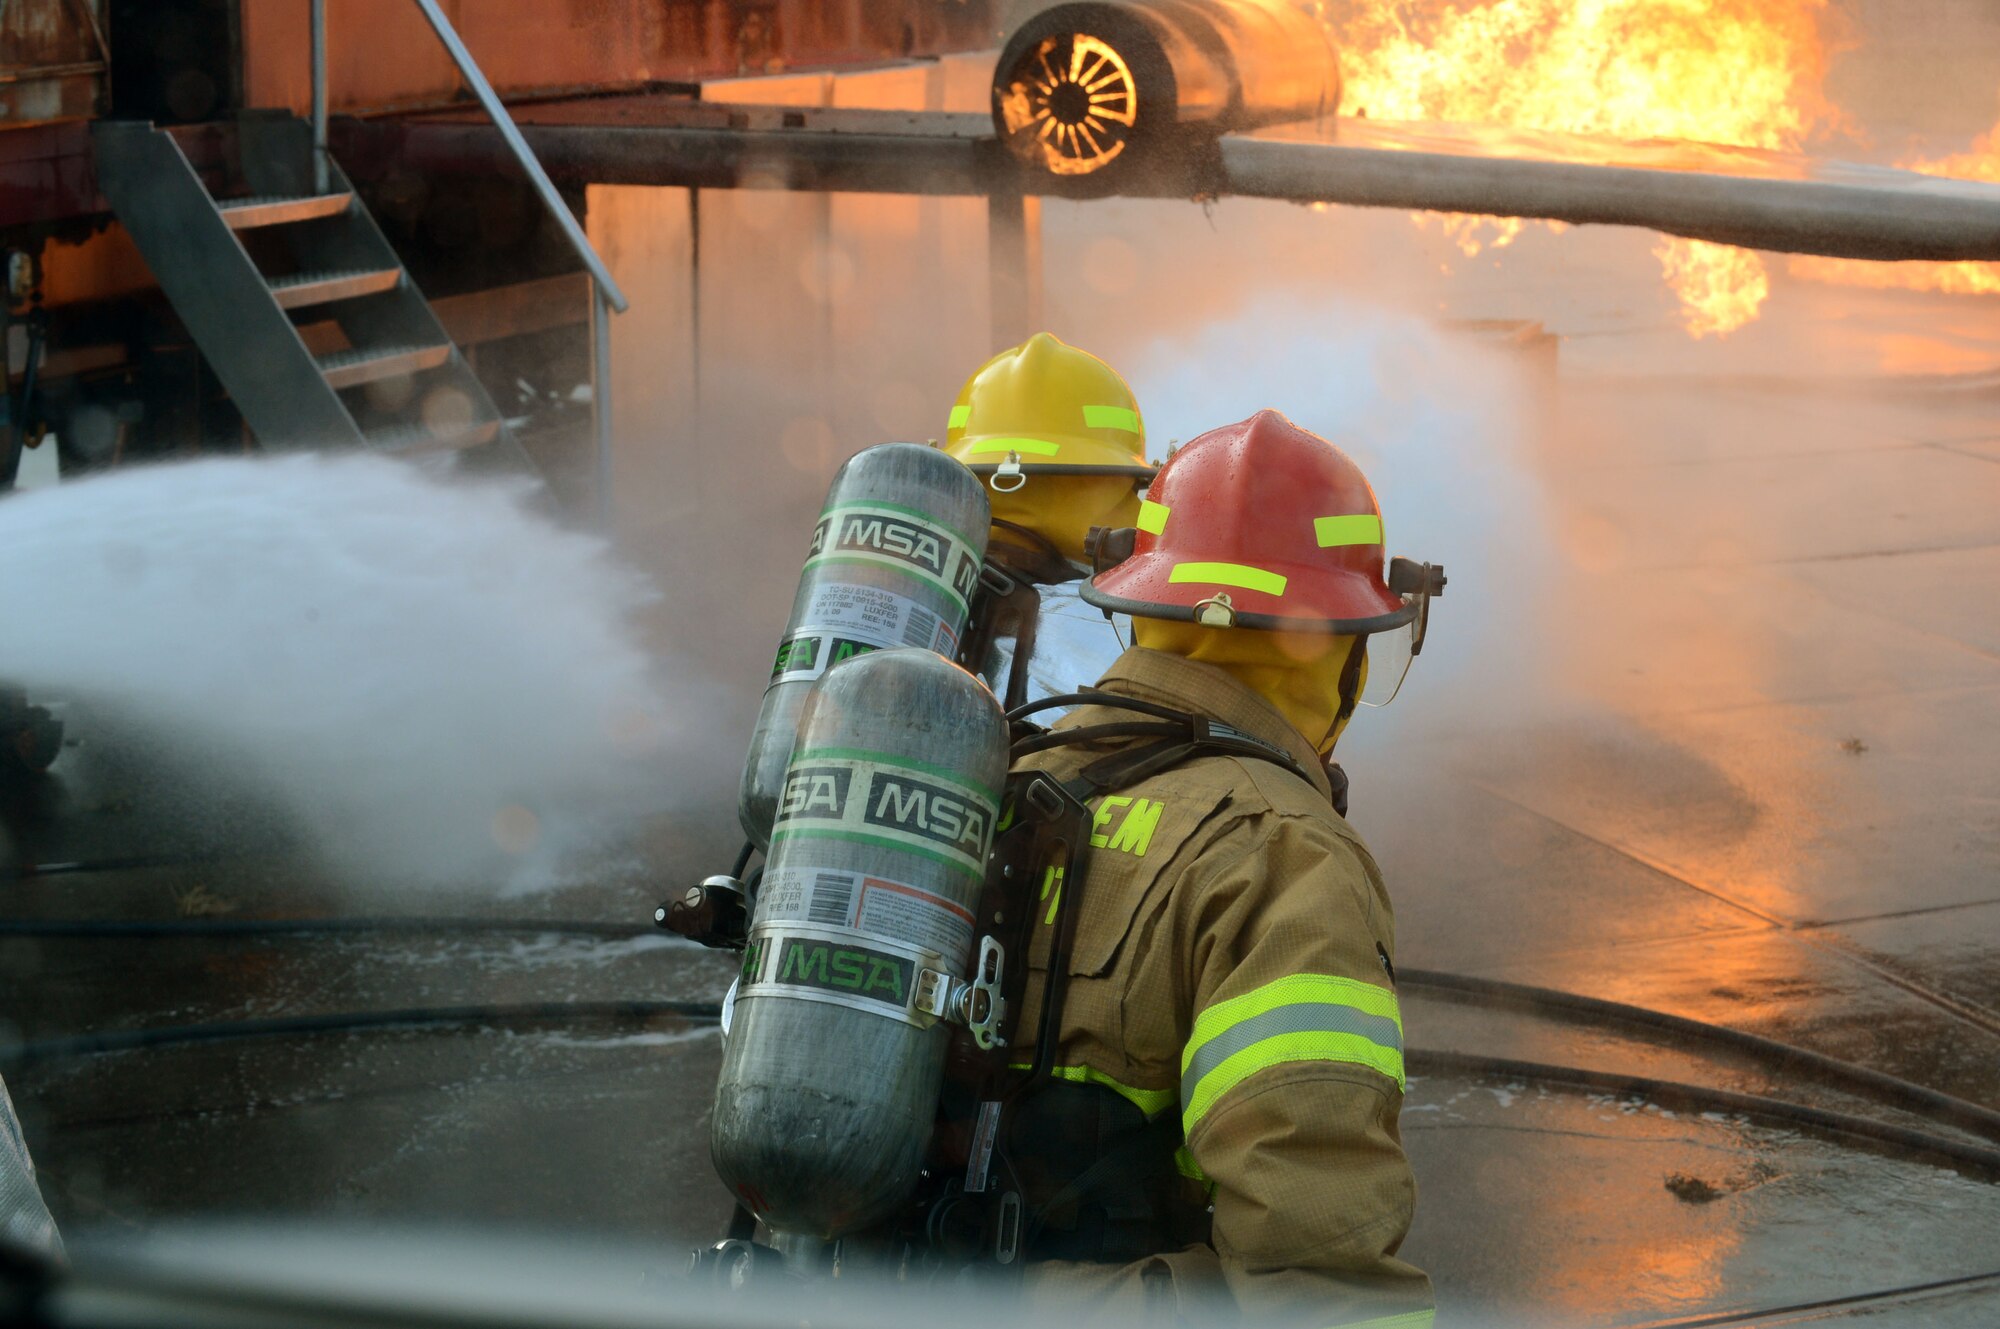 SPANGDAHLEM AIR BASE, Germany – U.S. Air Force firefighters suppress fires during a training exercise Jan. 8, 2014. During this training, fires reach upward of 500 degrees Fahrenheit inside a mobile aircraft fire trainer. (U.S. Air Force photo by Airman 1st Class Kyle Gese/Released)